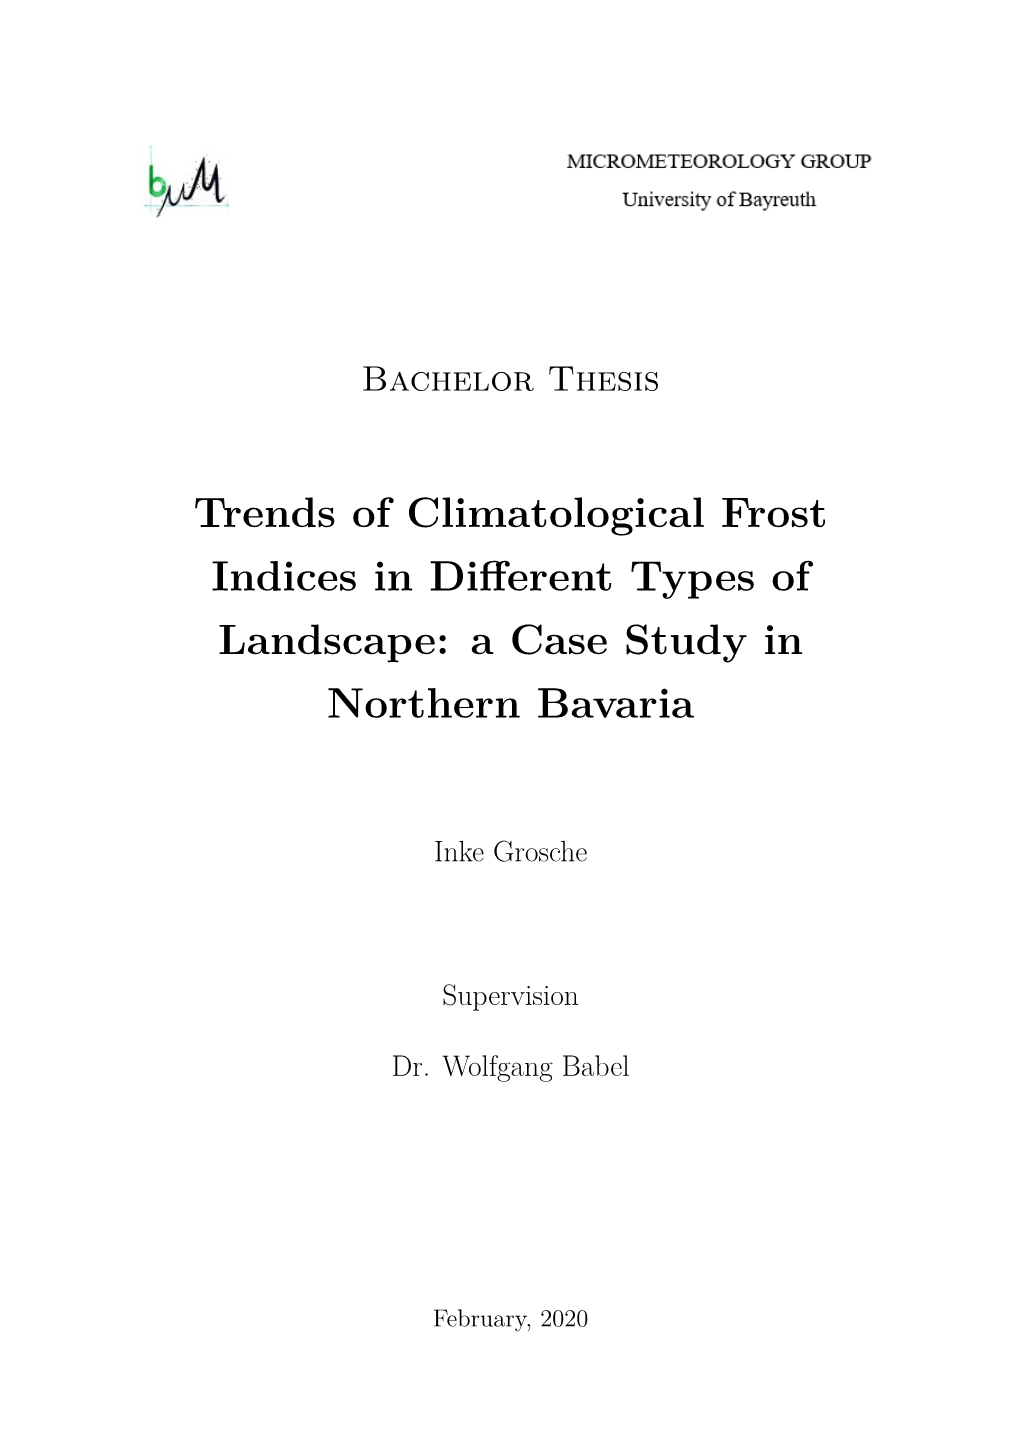 Trends of Climatological Frost Indices in Different Types of Landscape